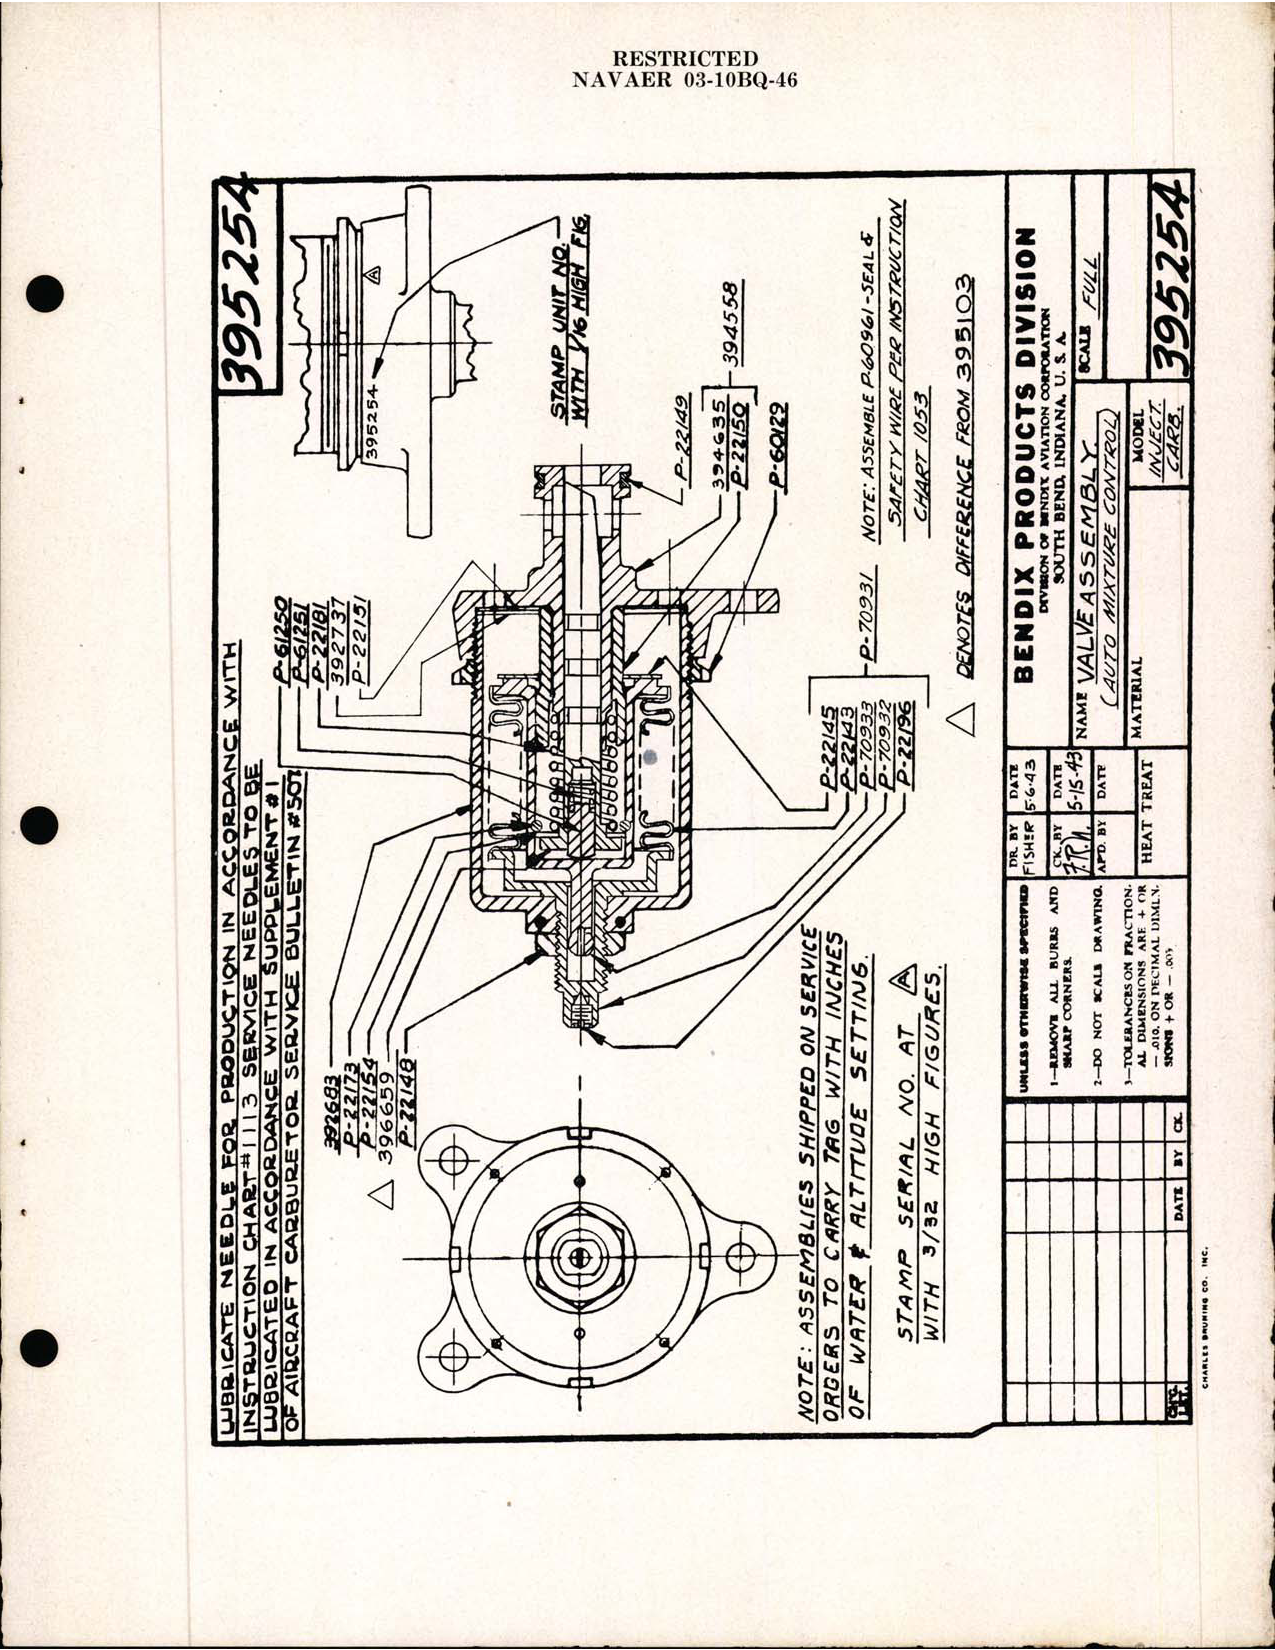 Sample page  16 from AirCorps Library document: PR-48A1 Injection Carburetors Instructions - 03-10BQ-46